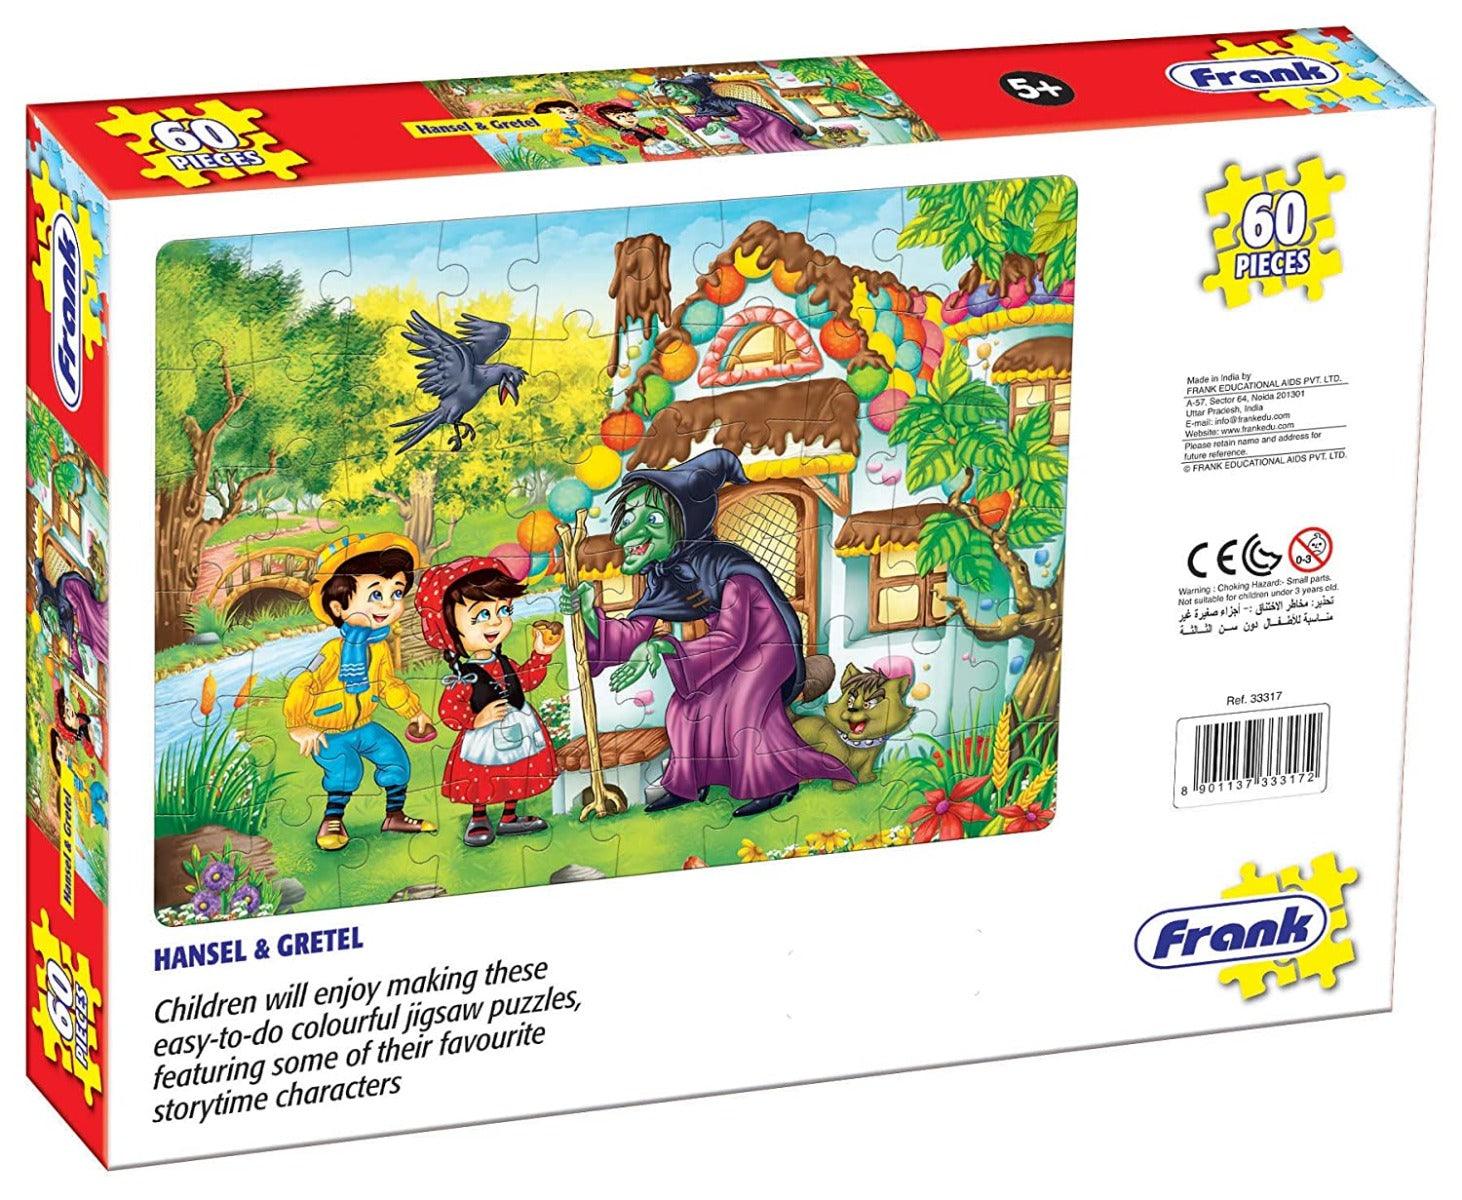 Frank Hansel & Gretel 60 Pieces Jigsaw Puzzle for 5 Year Old Kids and Above